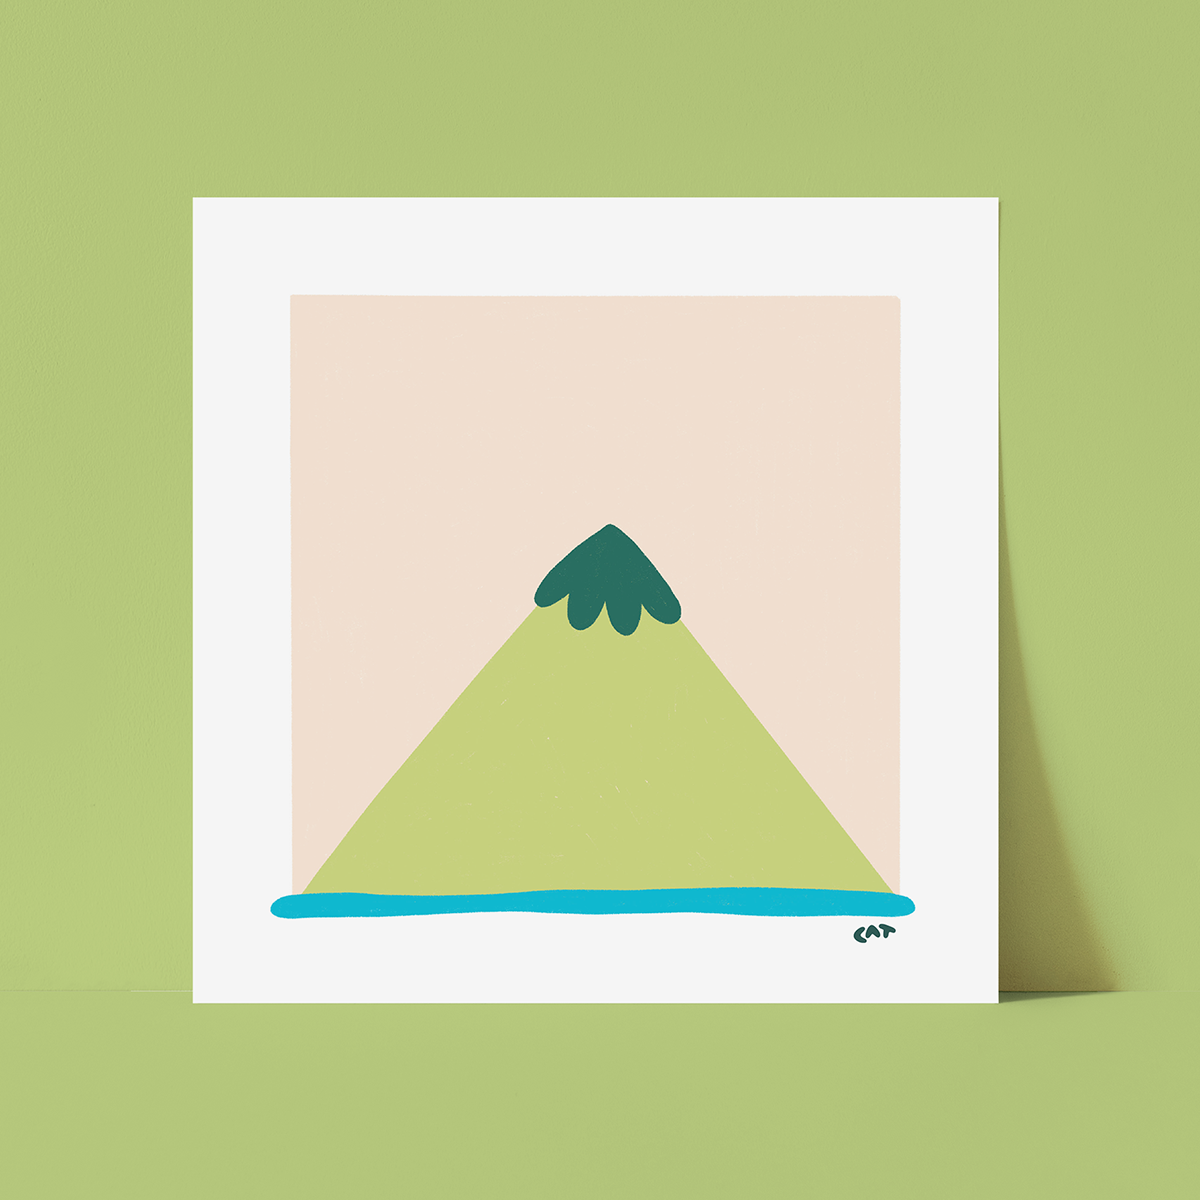 White framed print of a beige square with a green triangle that looks like a mountain, sitting on top of a blue line.